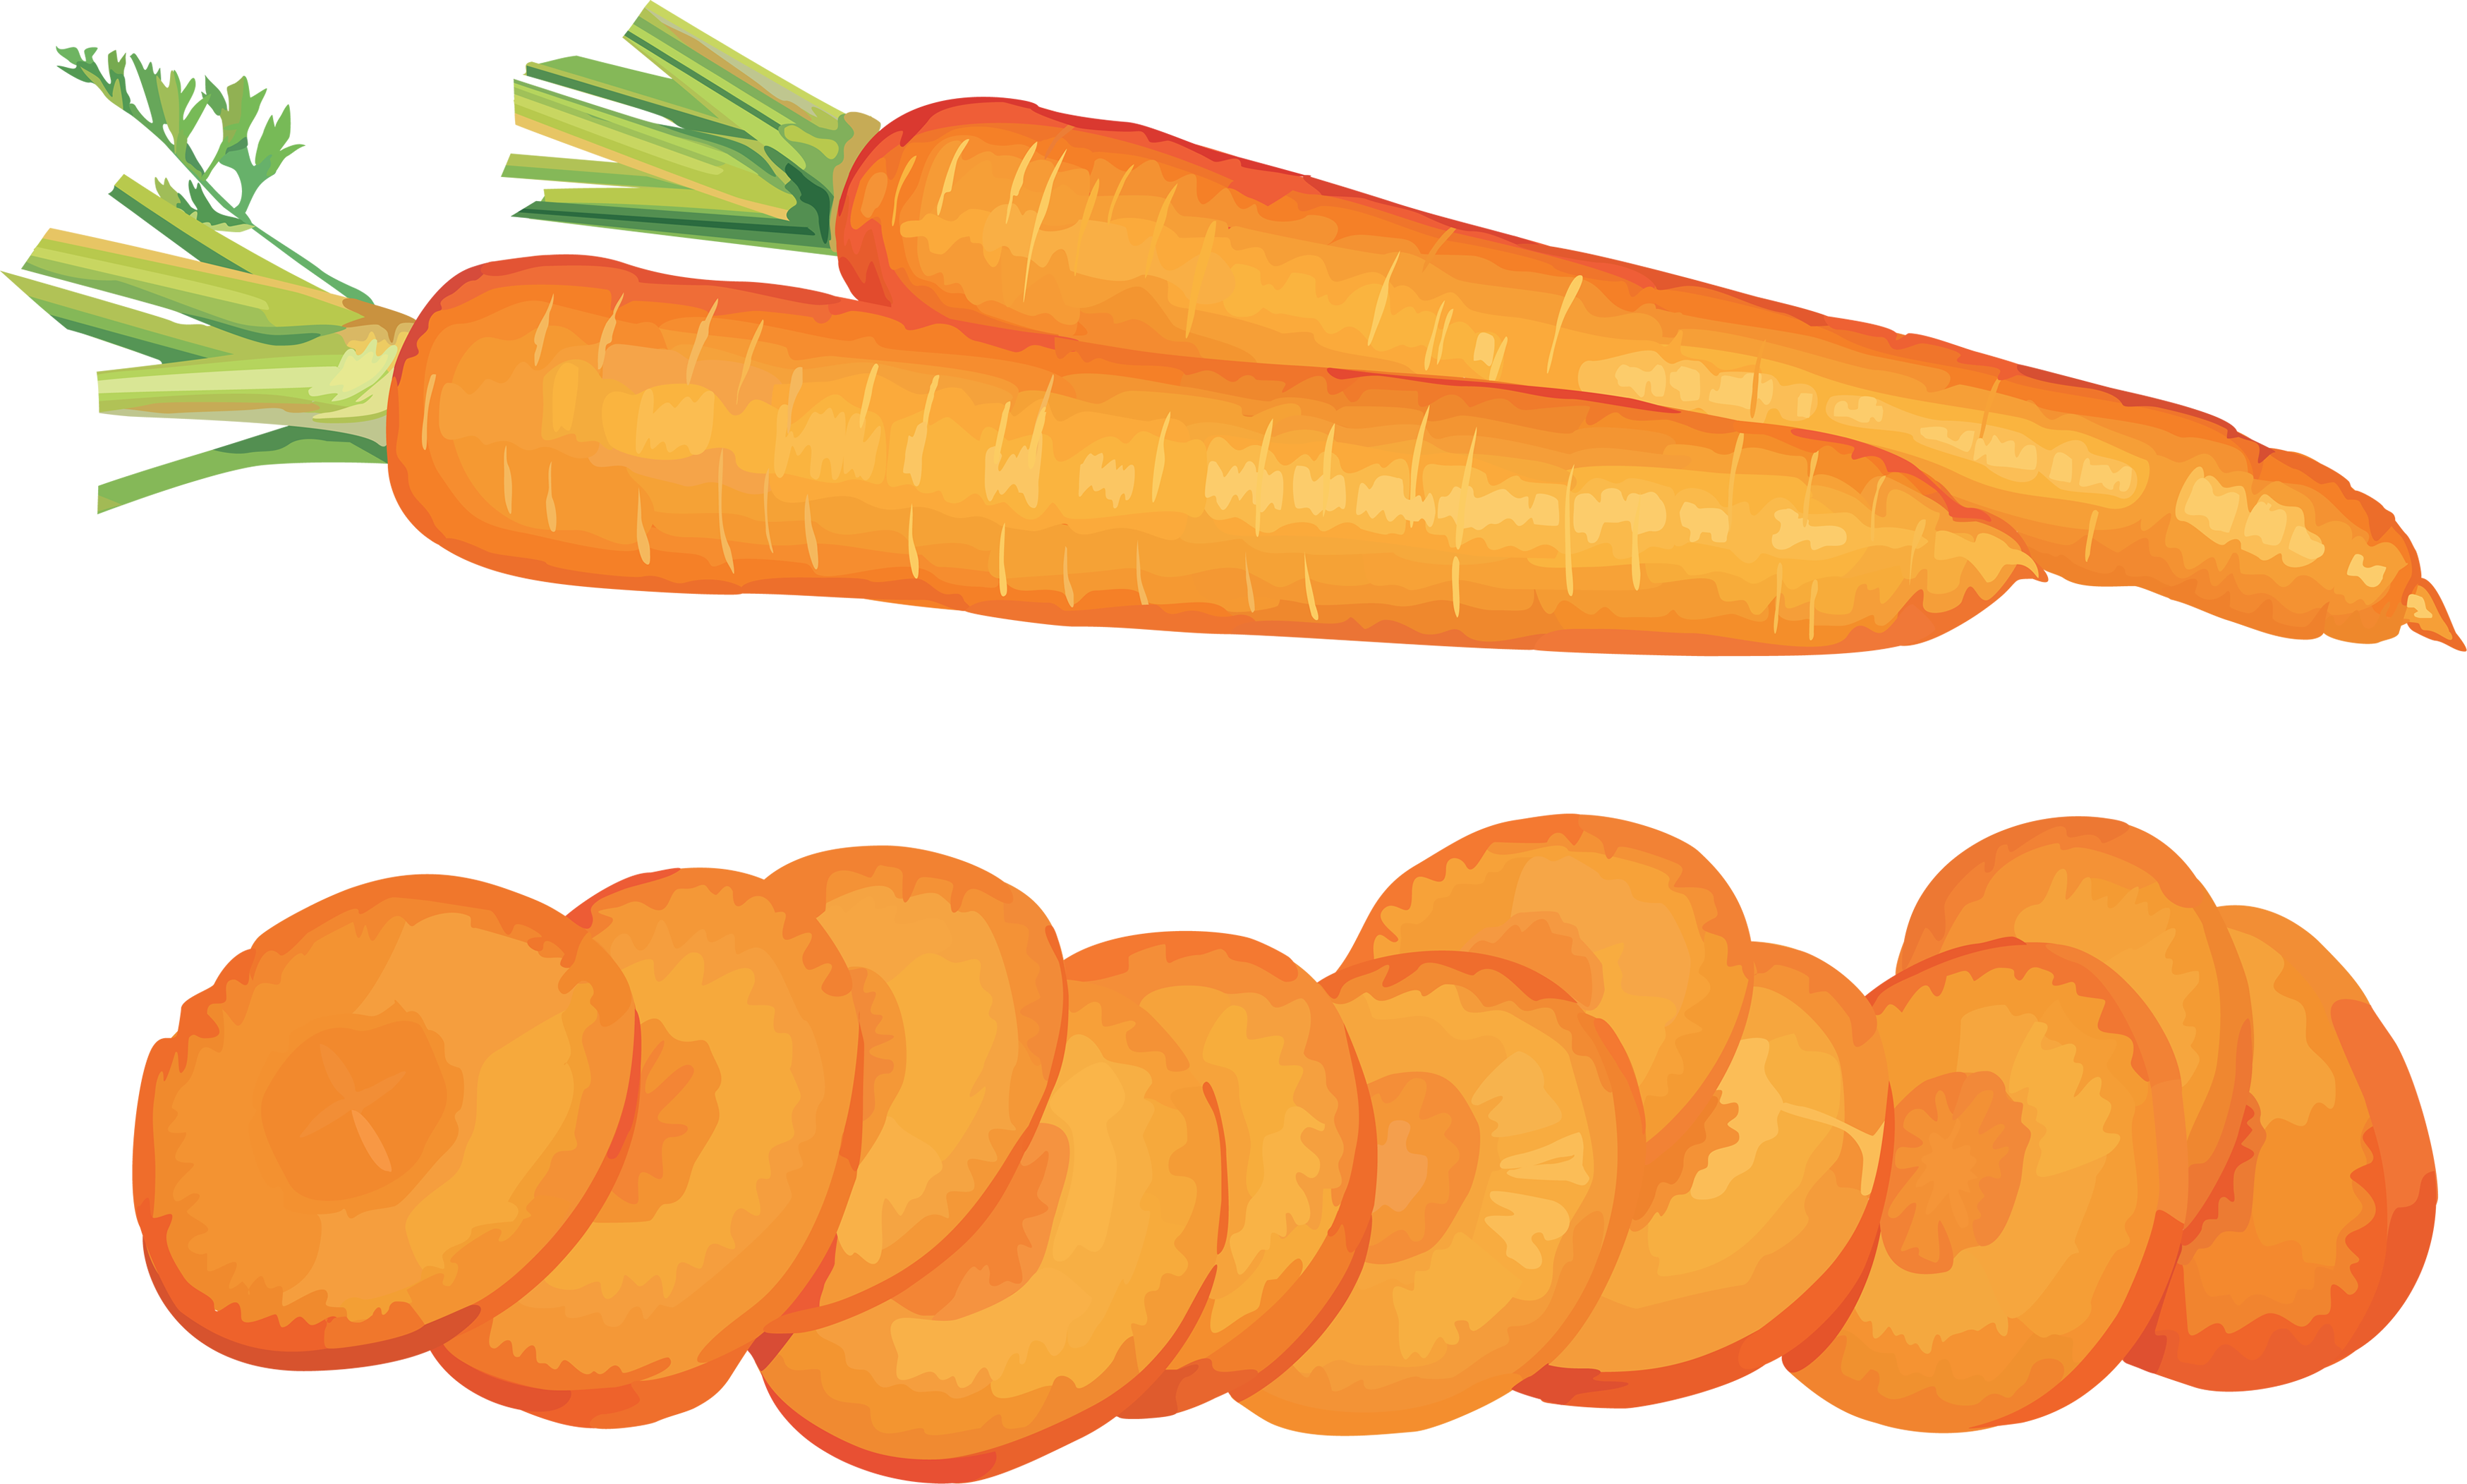 Carrot image free download clipart